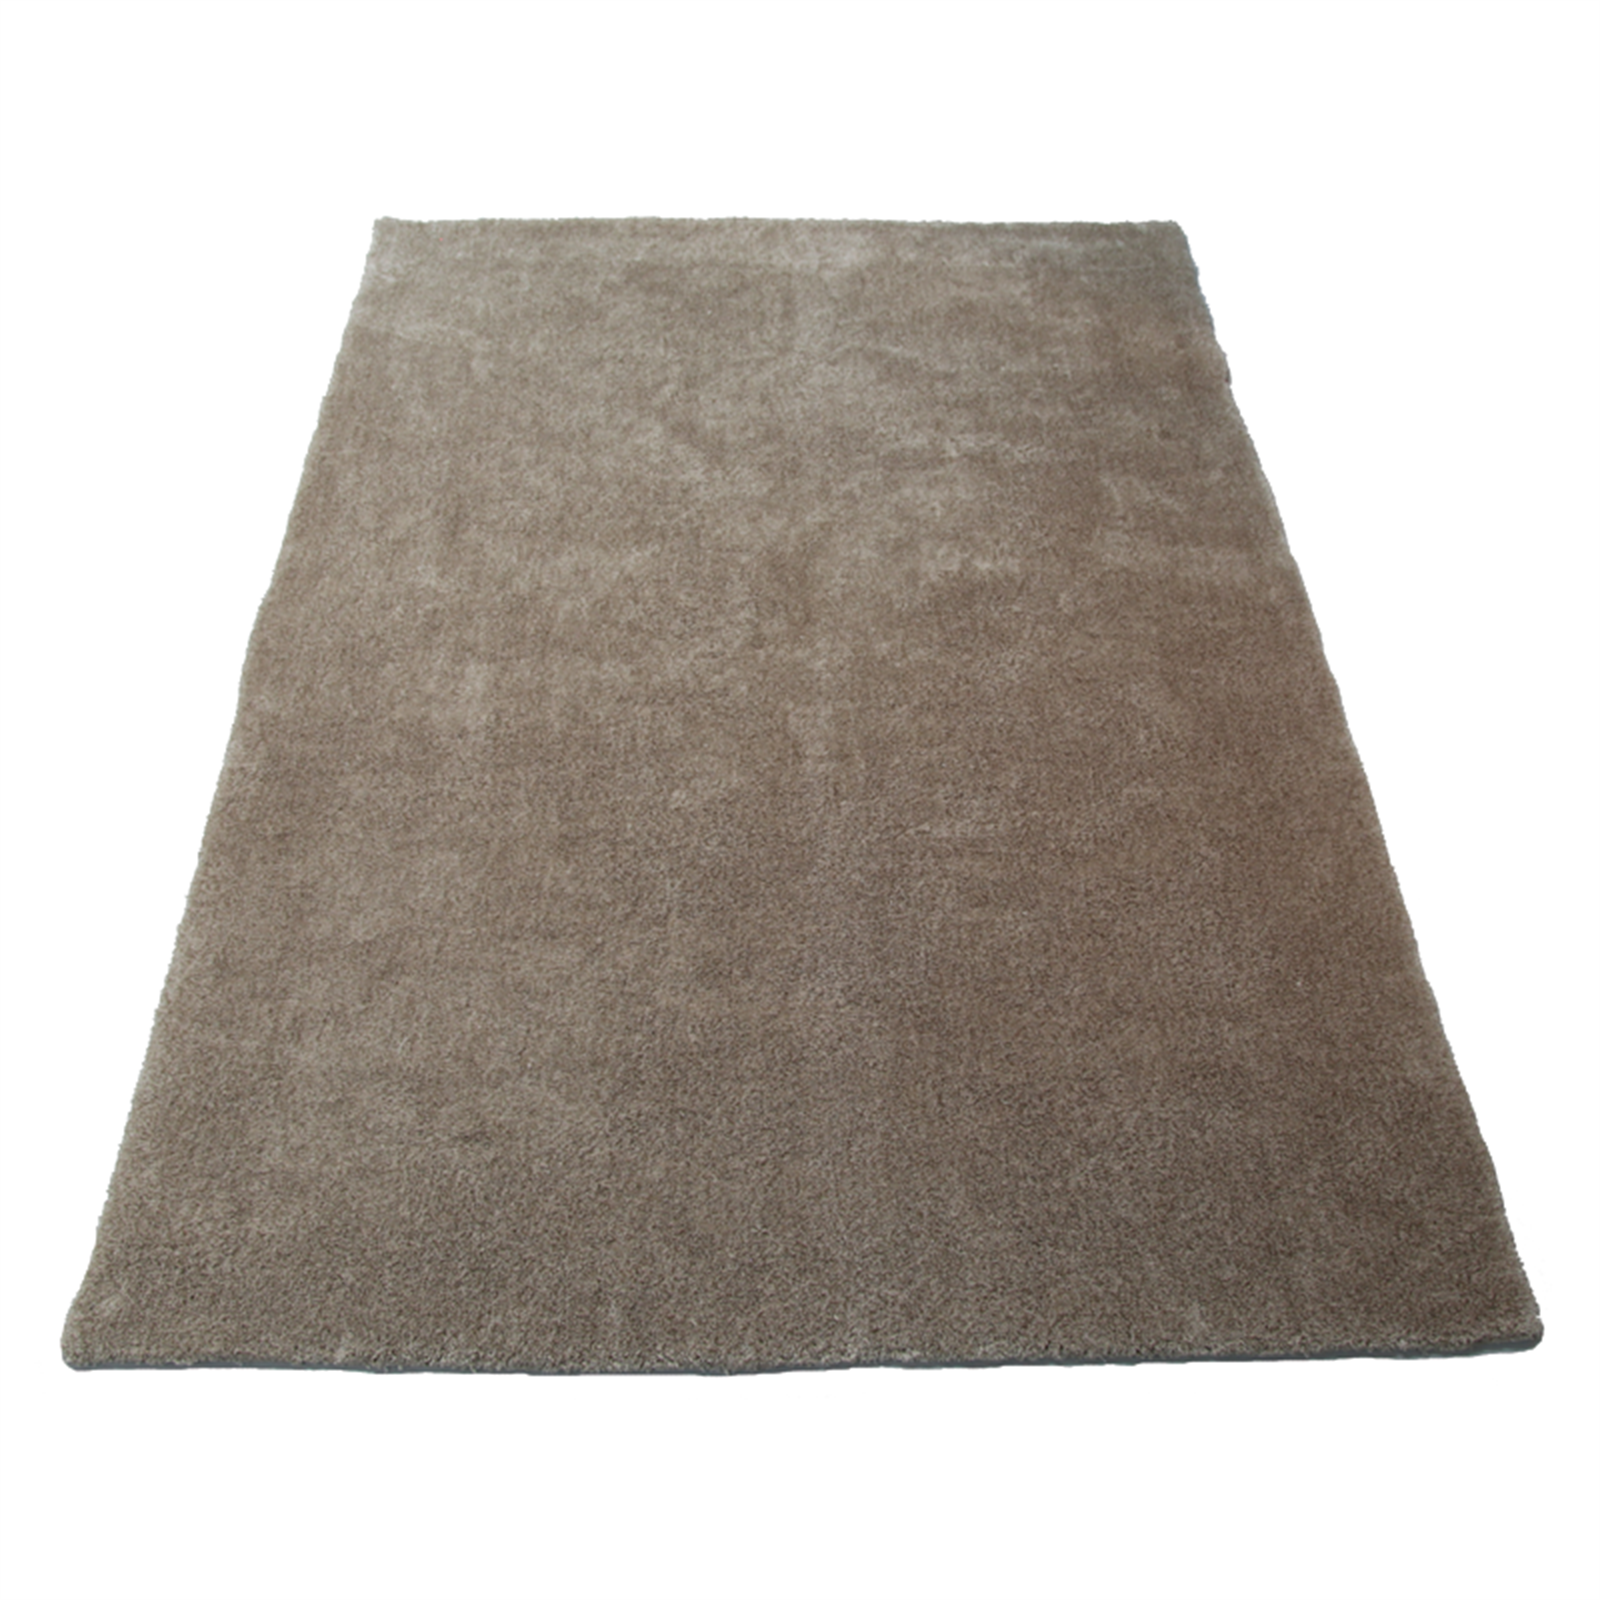 The Estate Collection 200 x 290cm Wholemeal Berlin Rug